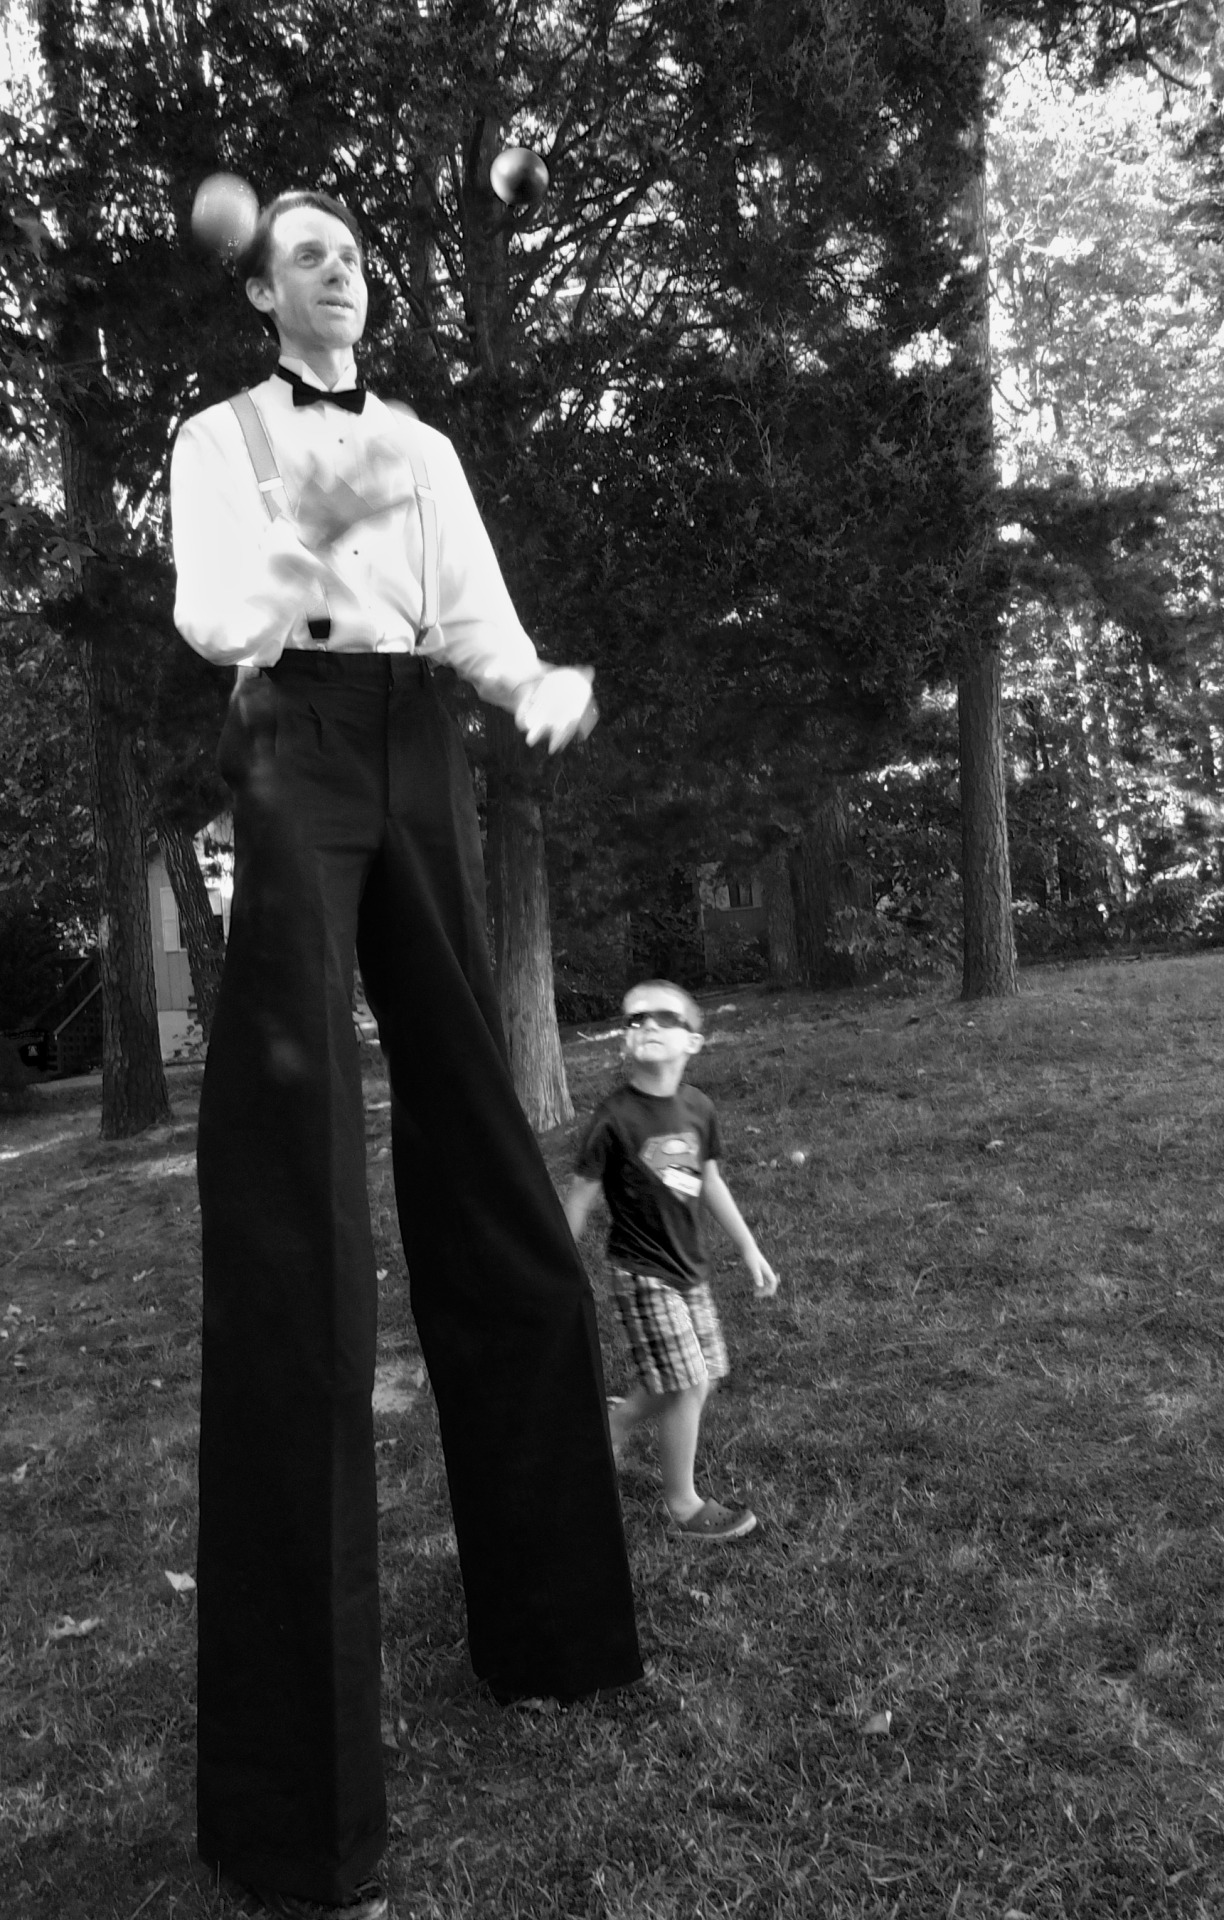 man on stilts juggling with little boy watching